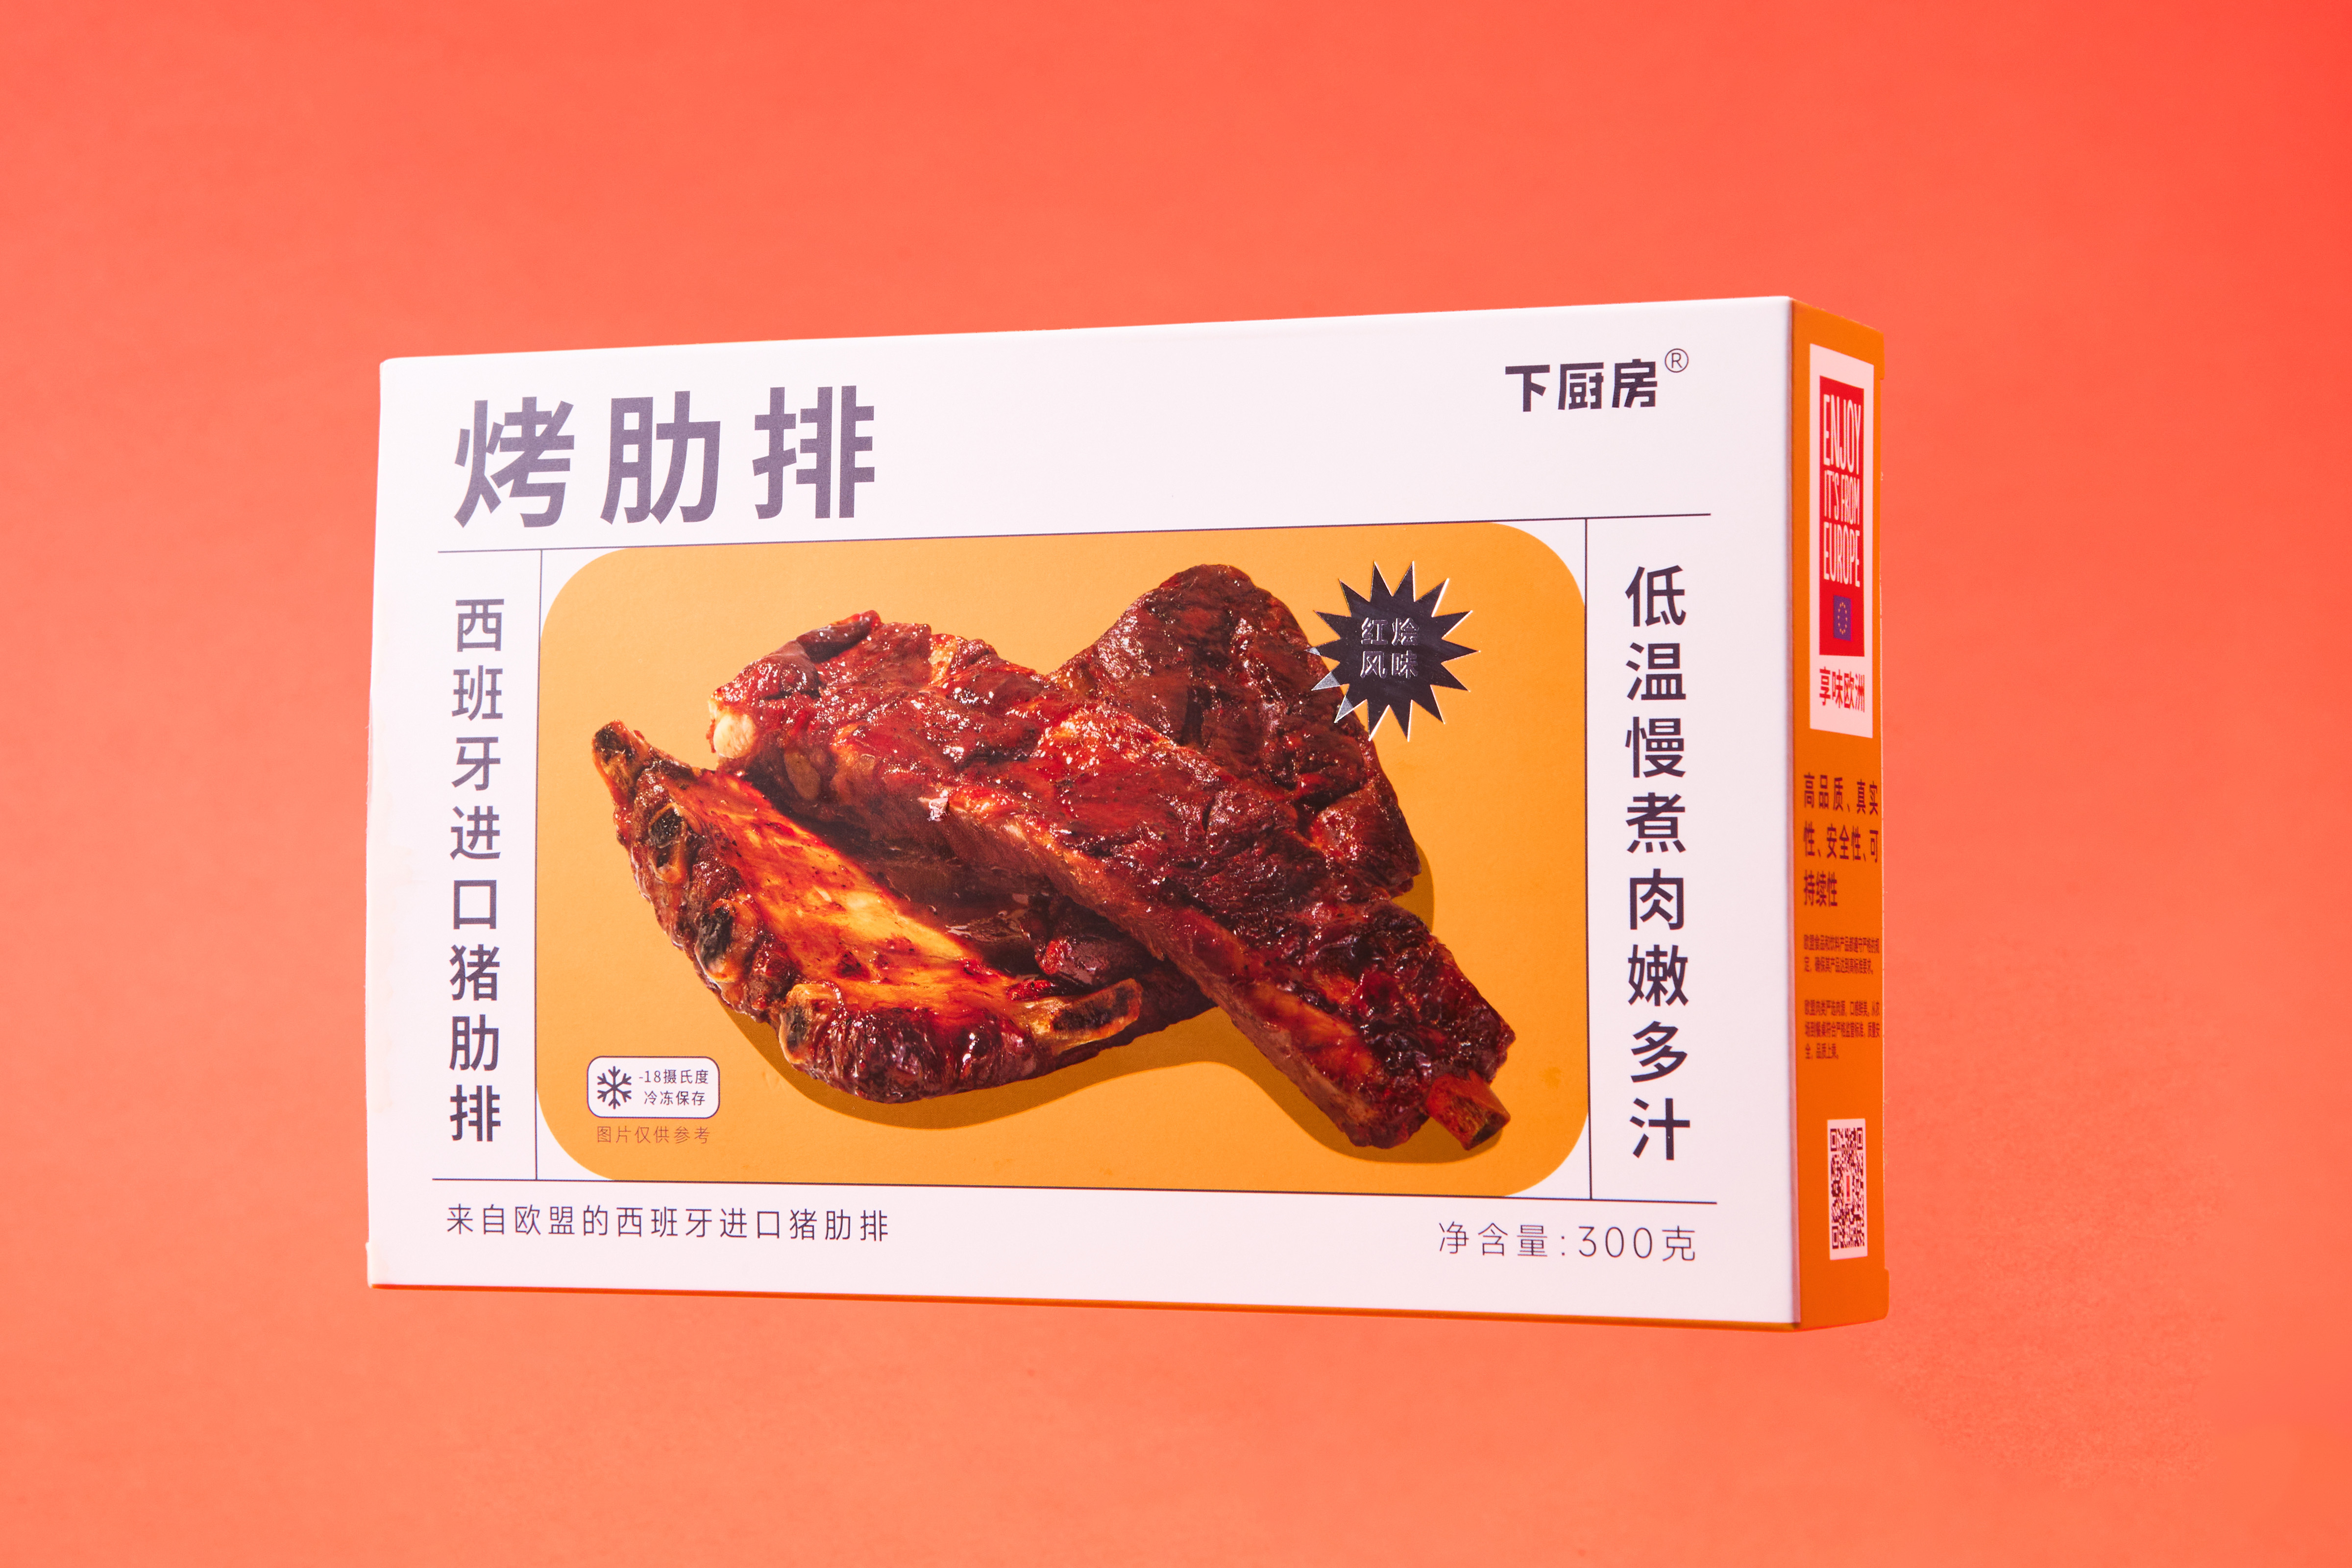 Package of ribs with 'Enjoy its from Europe' logo and Chinese description 